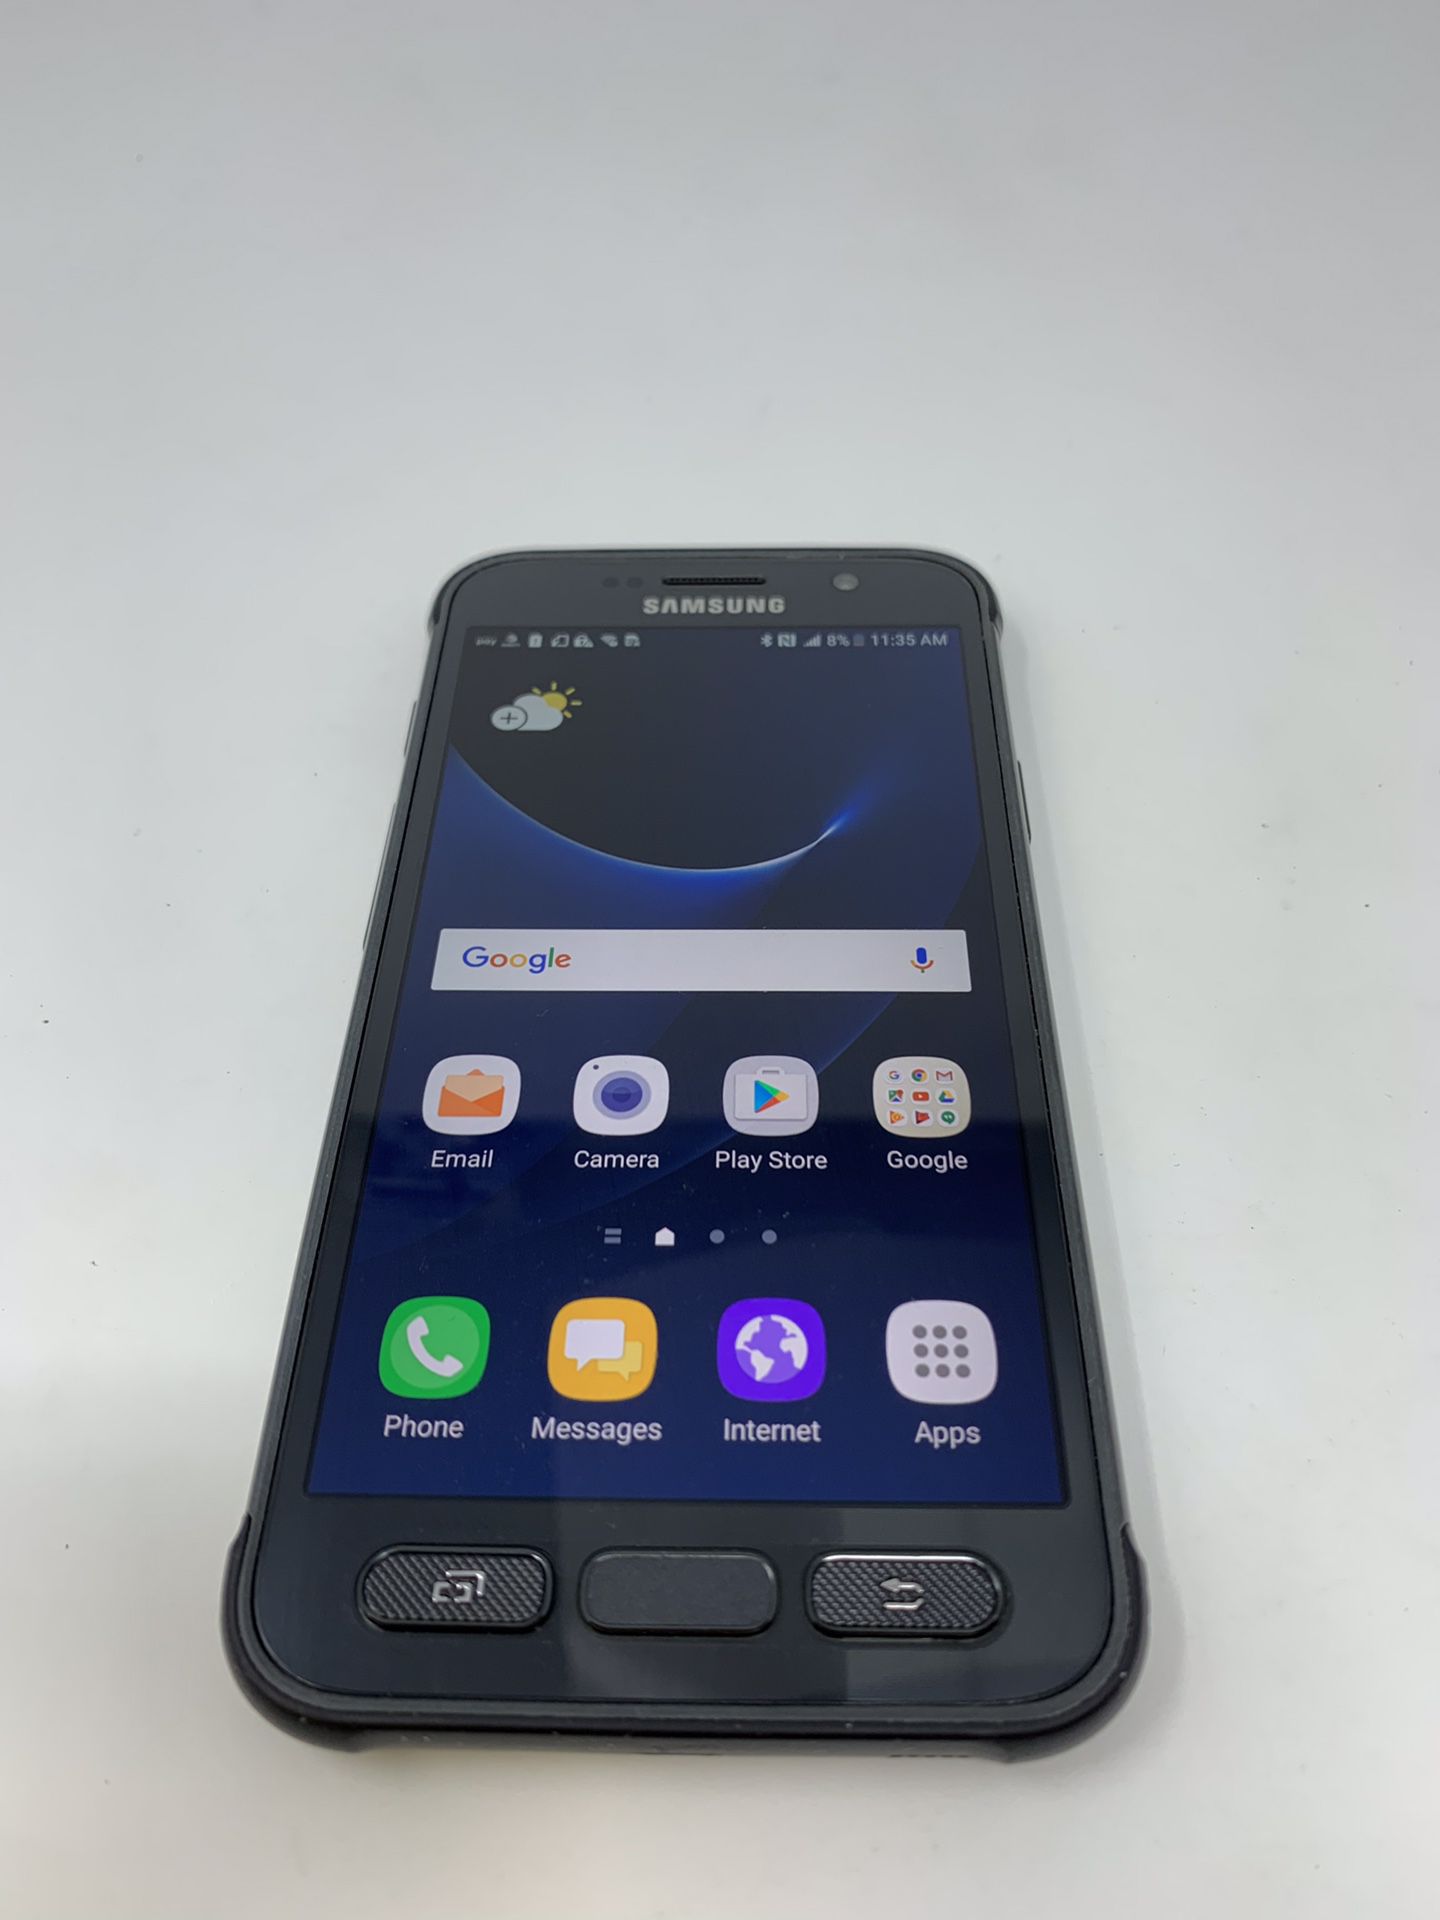 Samsung Galaxy S7 Active 32GB, Black, Light Shadow, Unlocked, 90 Day Warranty, From Lease to own